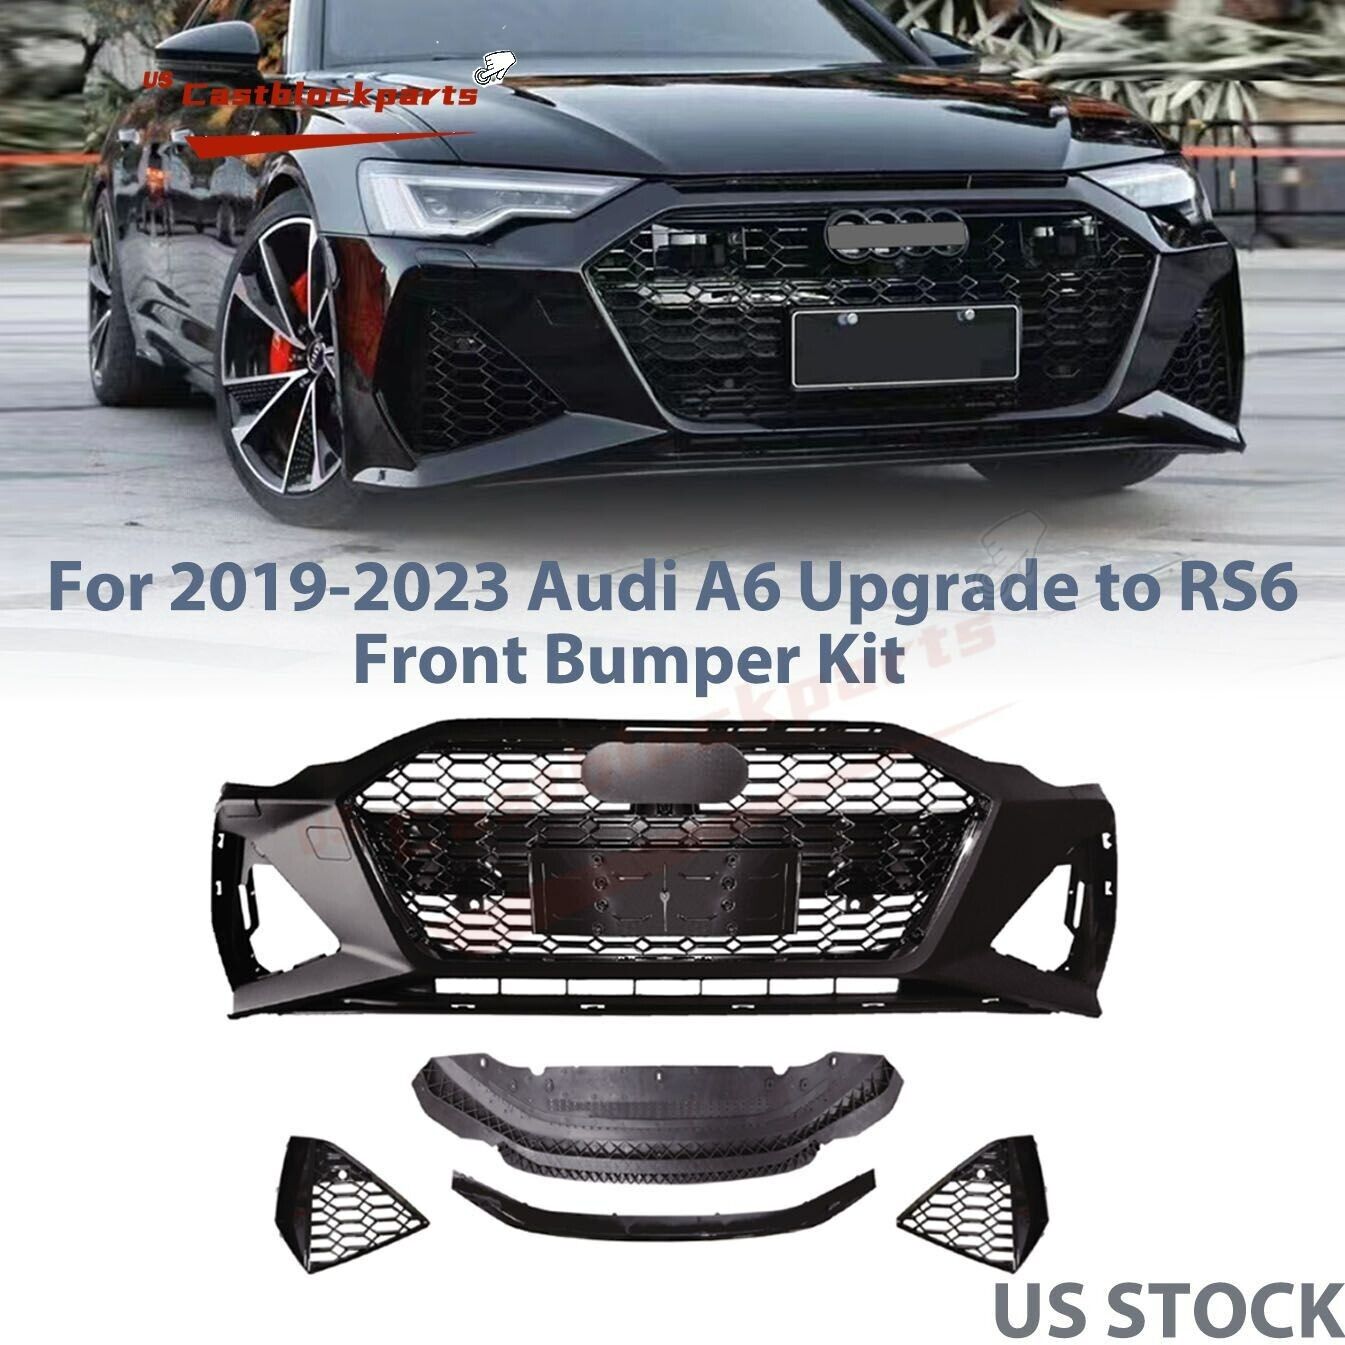 RS6 Style For 2019-2023 Audi A6 Facelift Front Bumper Kit Assembly+Grille